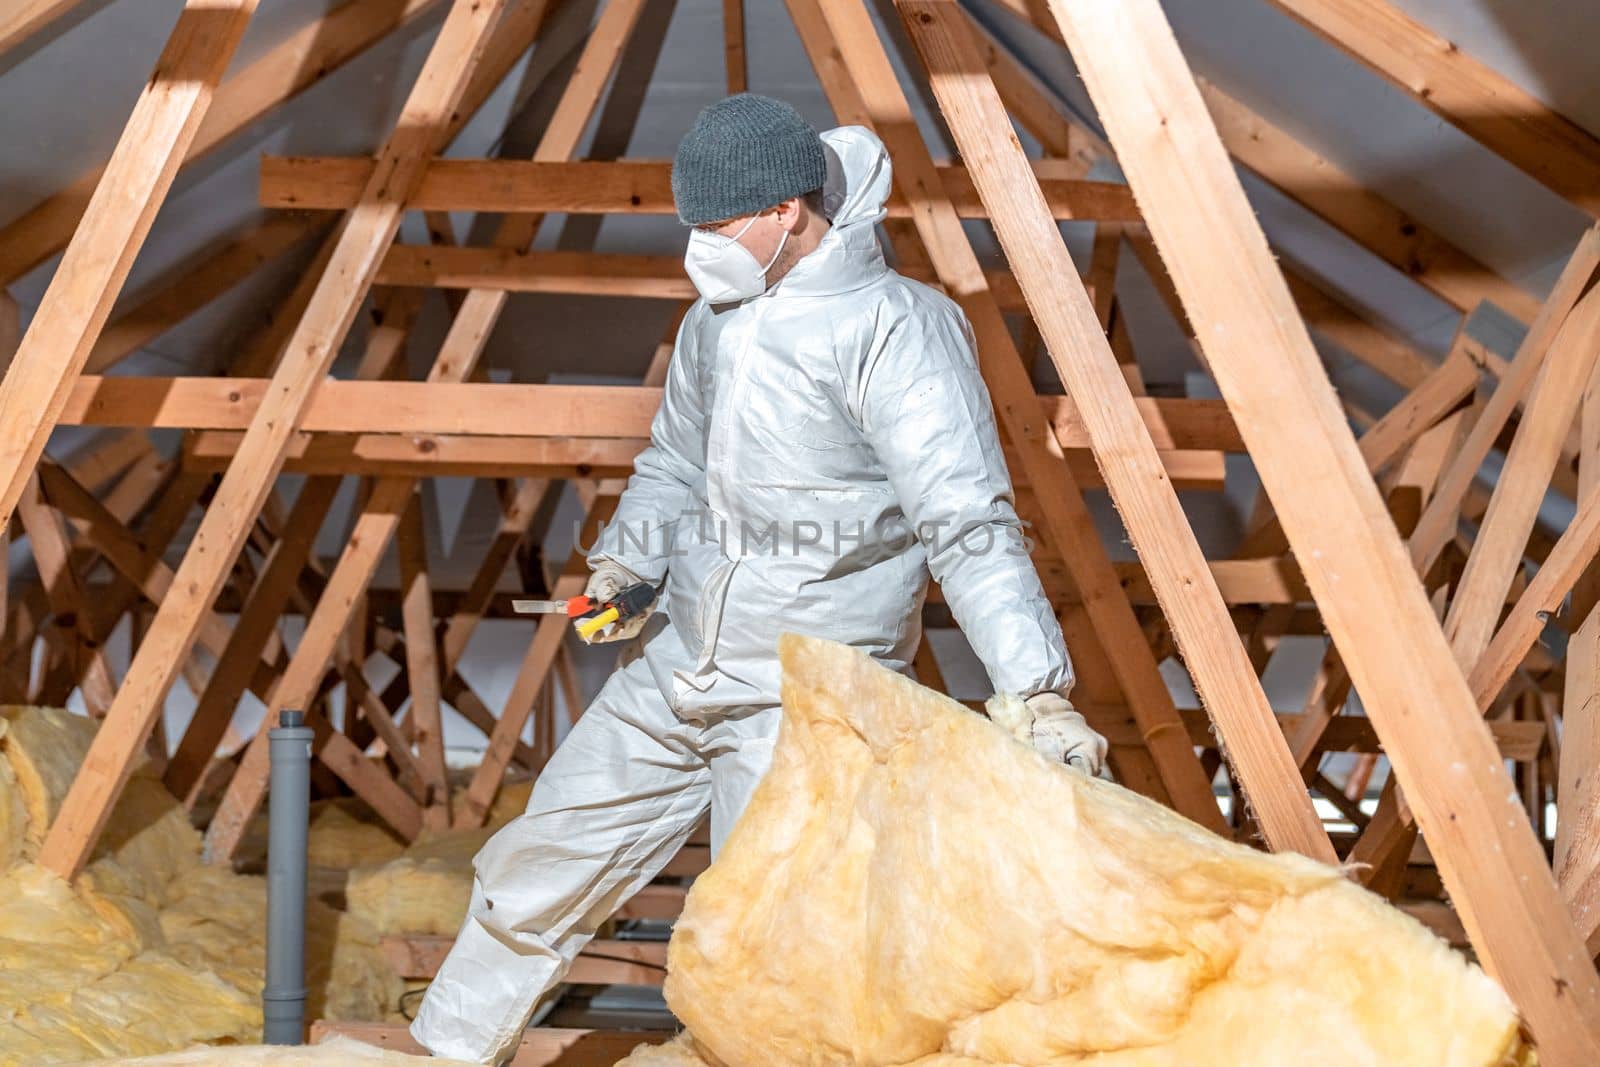 thermal insulation with glass wool by Edophoto